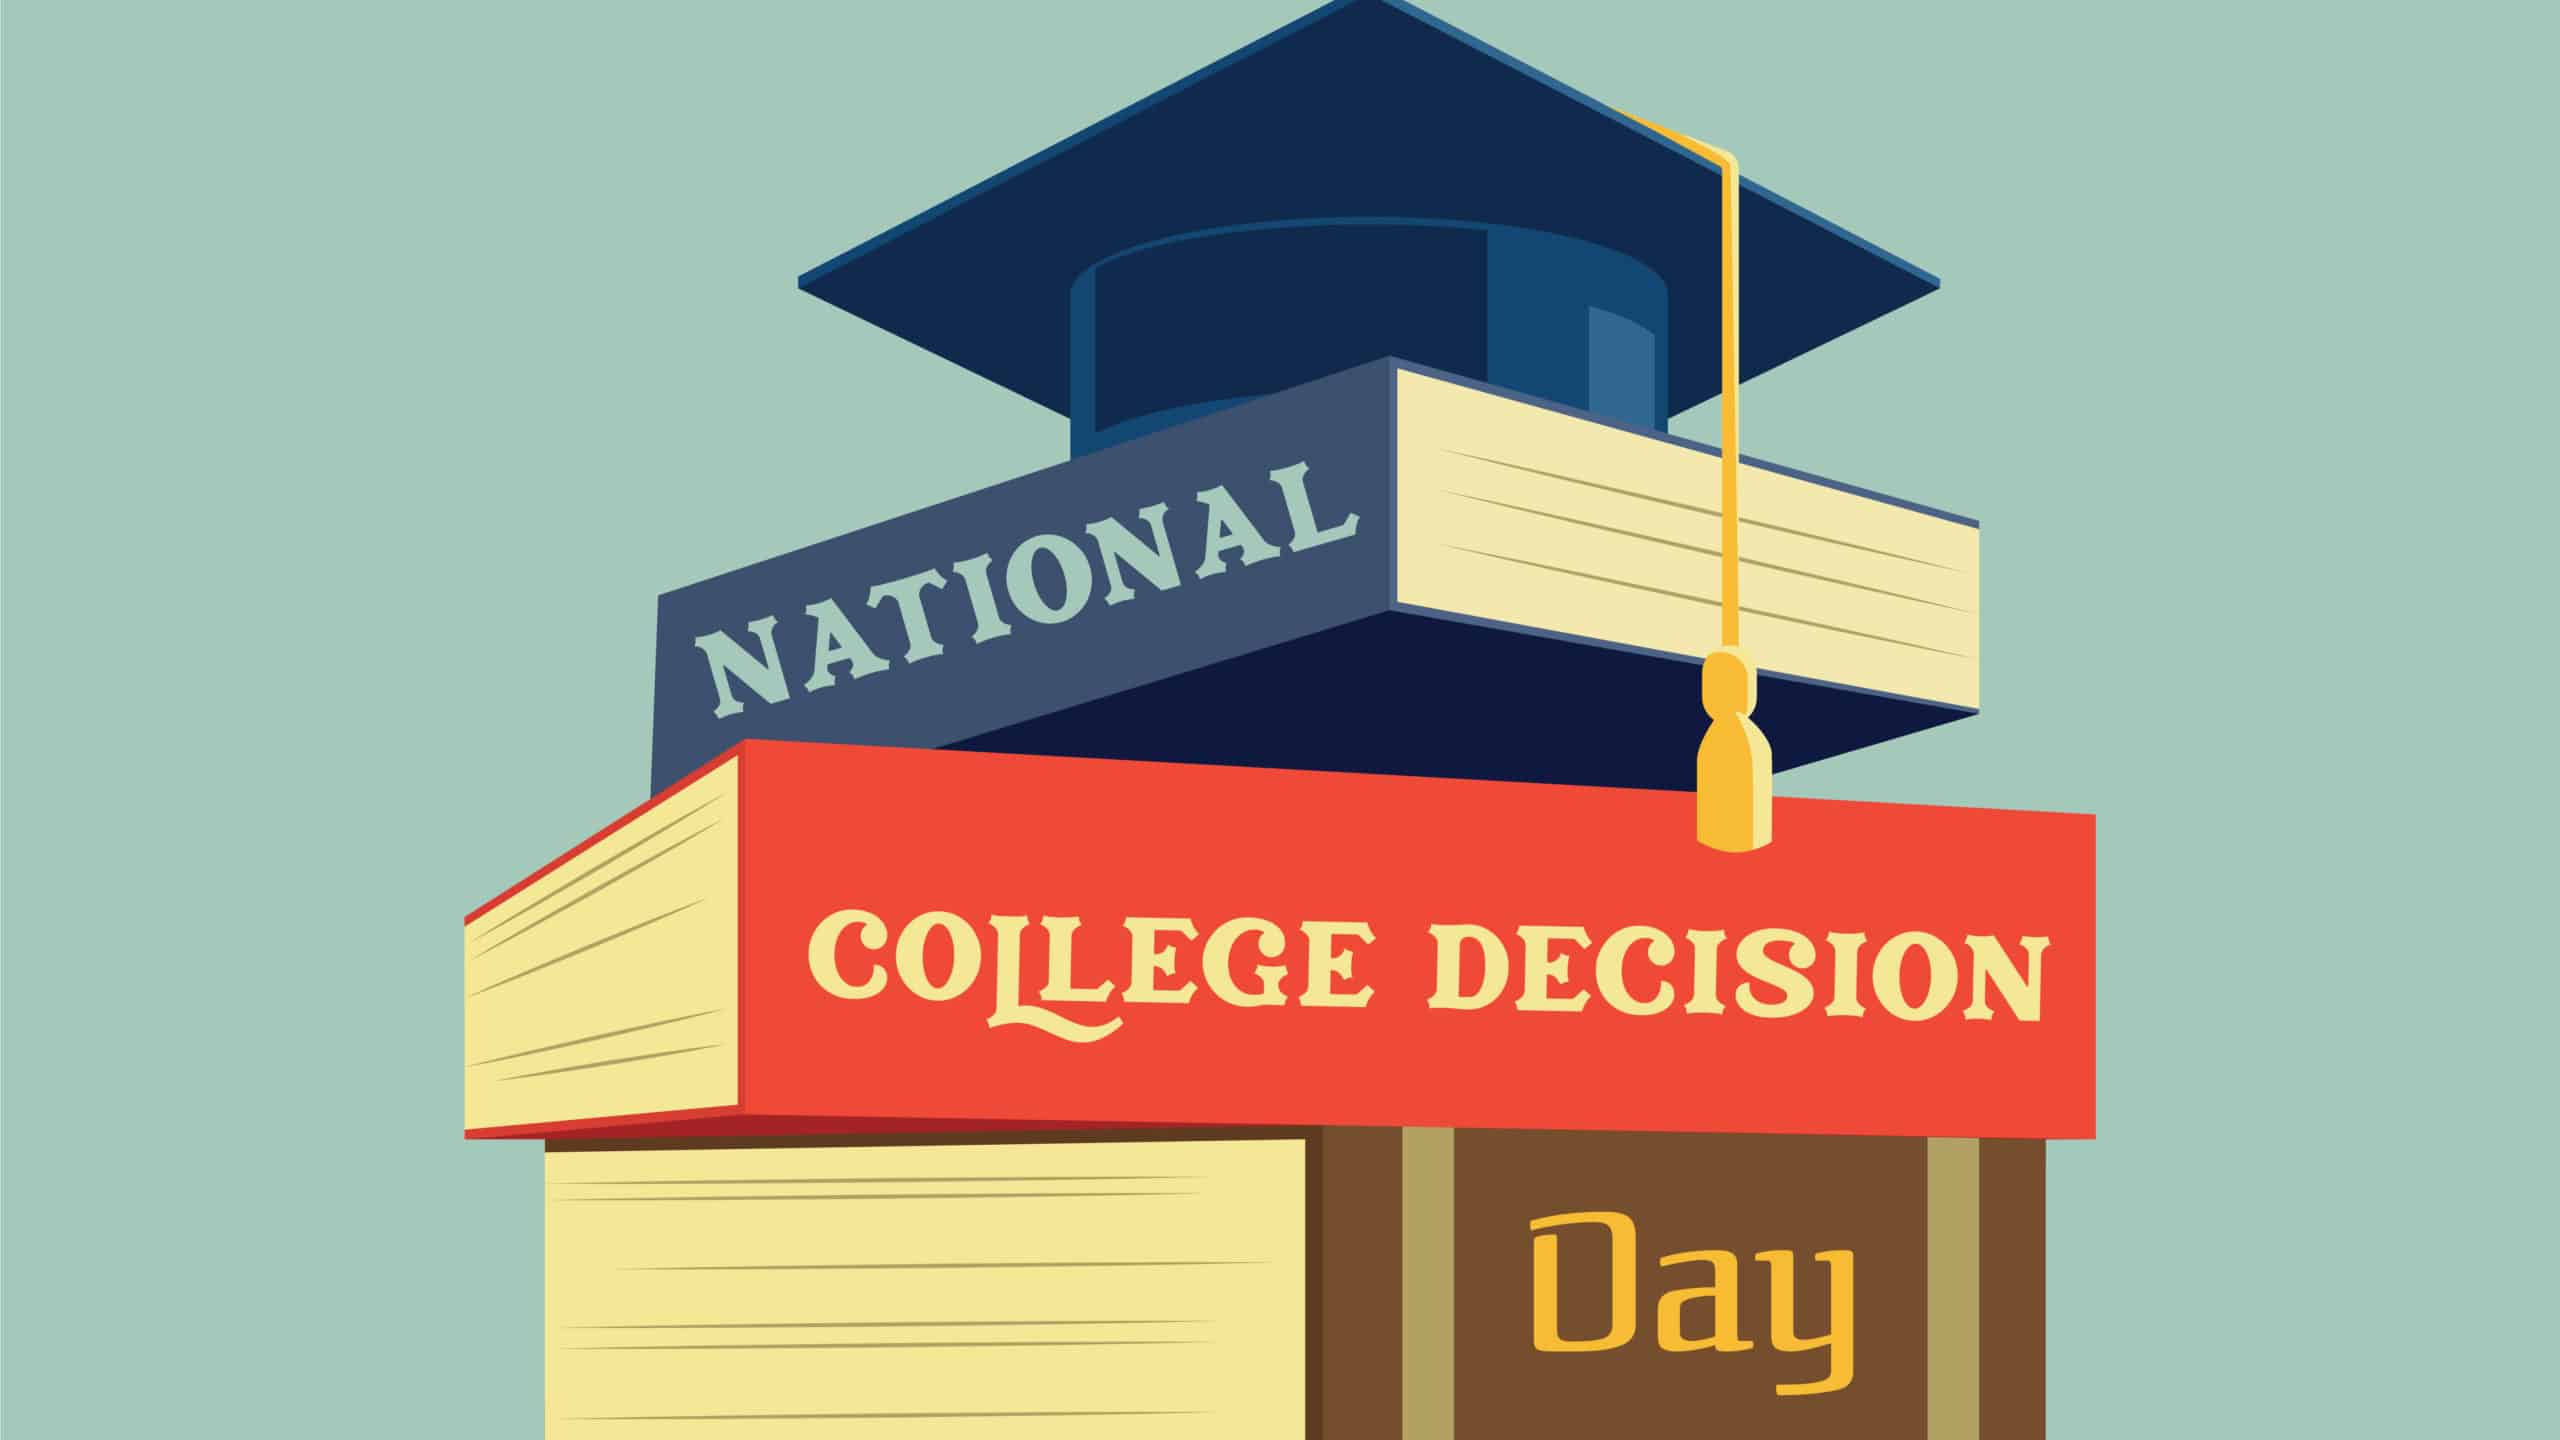 NEXT STEPS survey asks for churches' input as National College Decision